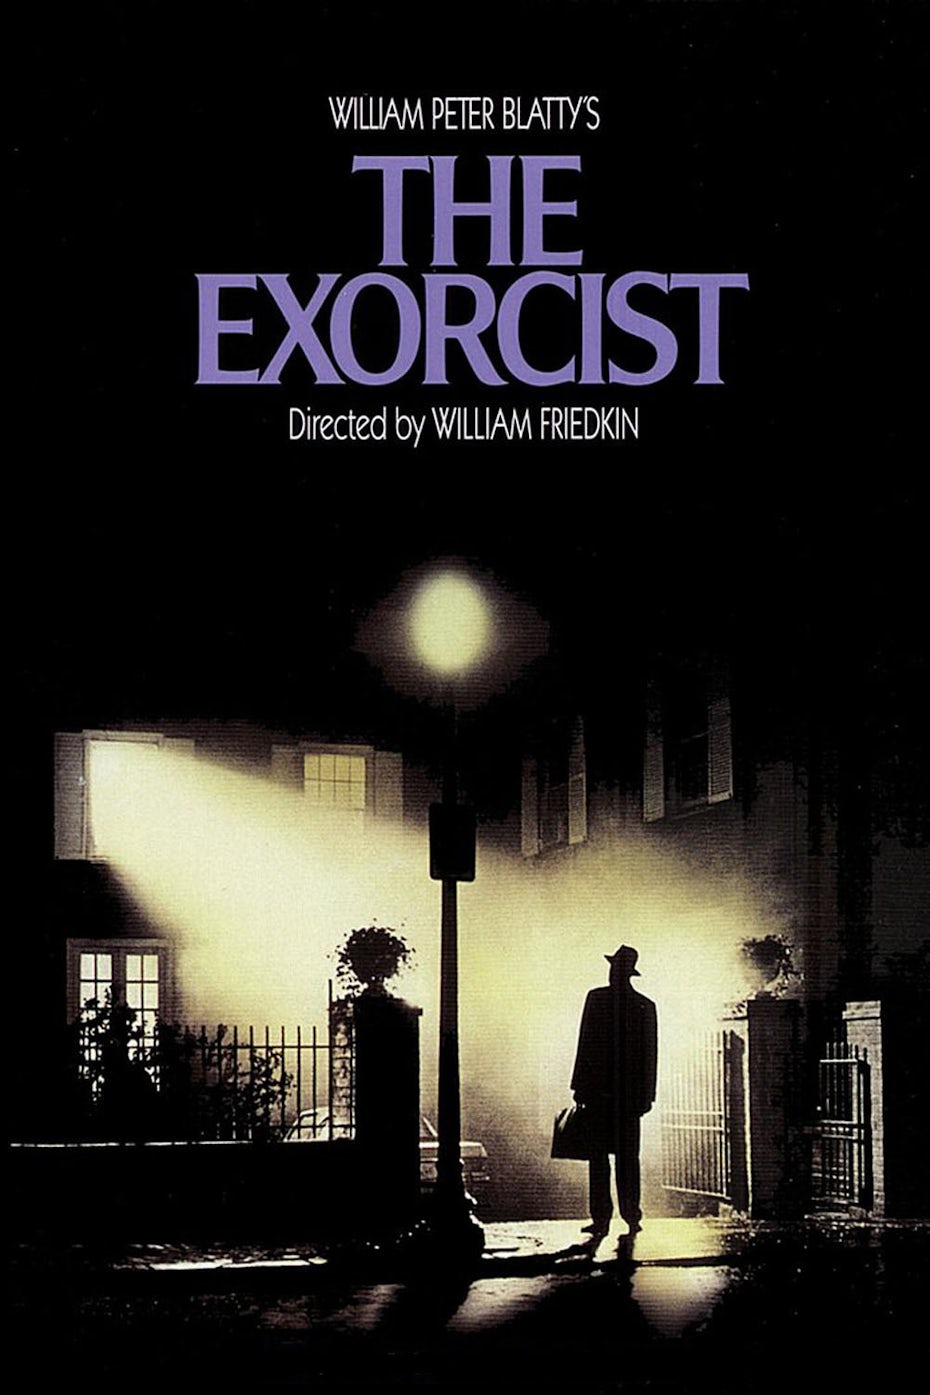 the exorcist poster